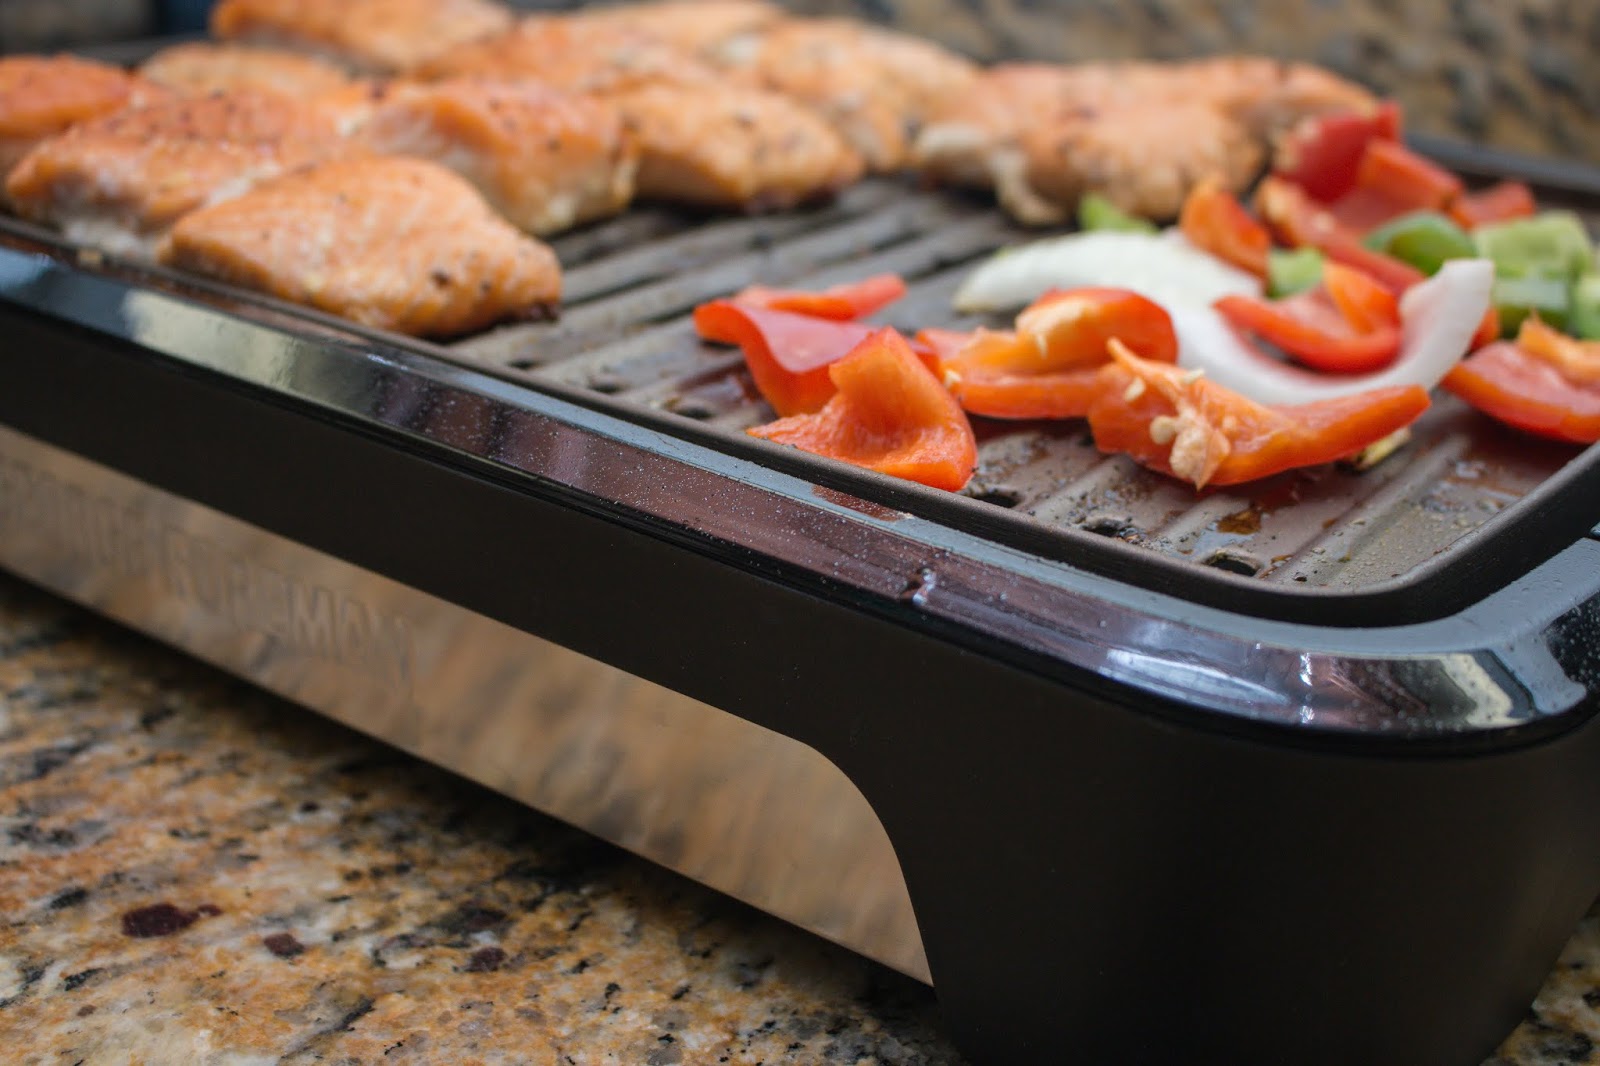 Smokeless Indoor Grilling Made Easy with the George Foreman Grill